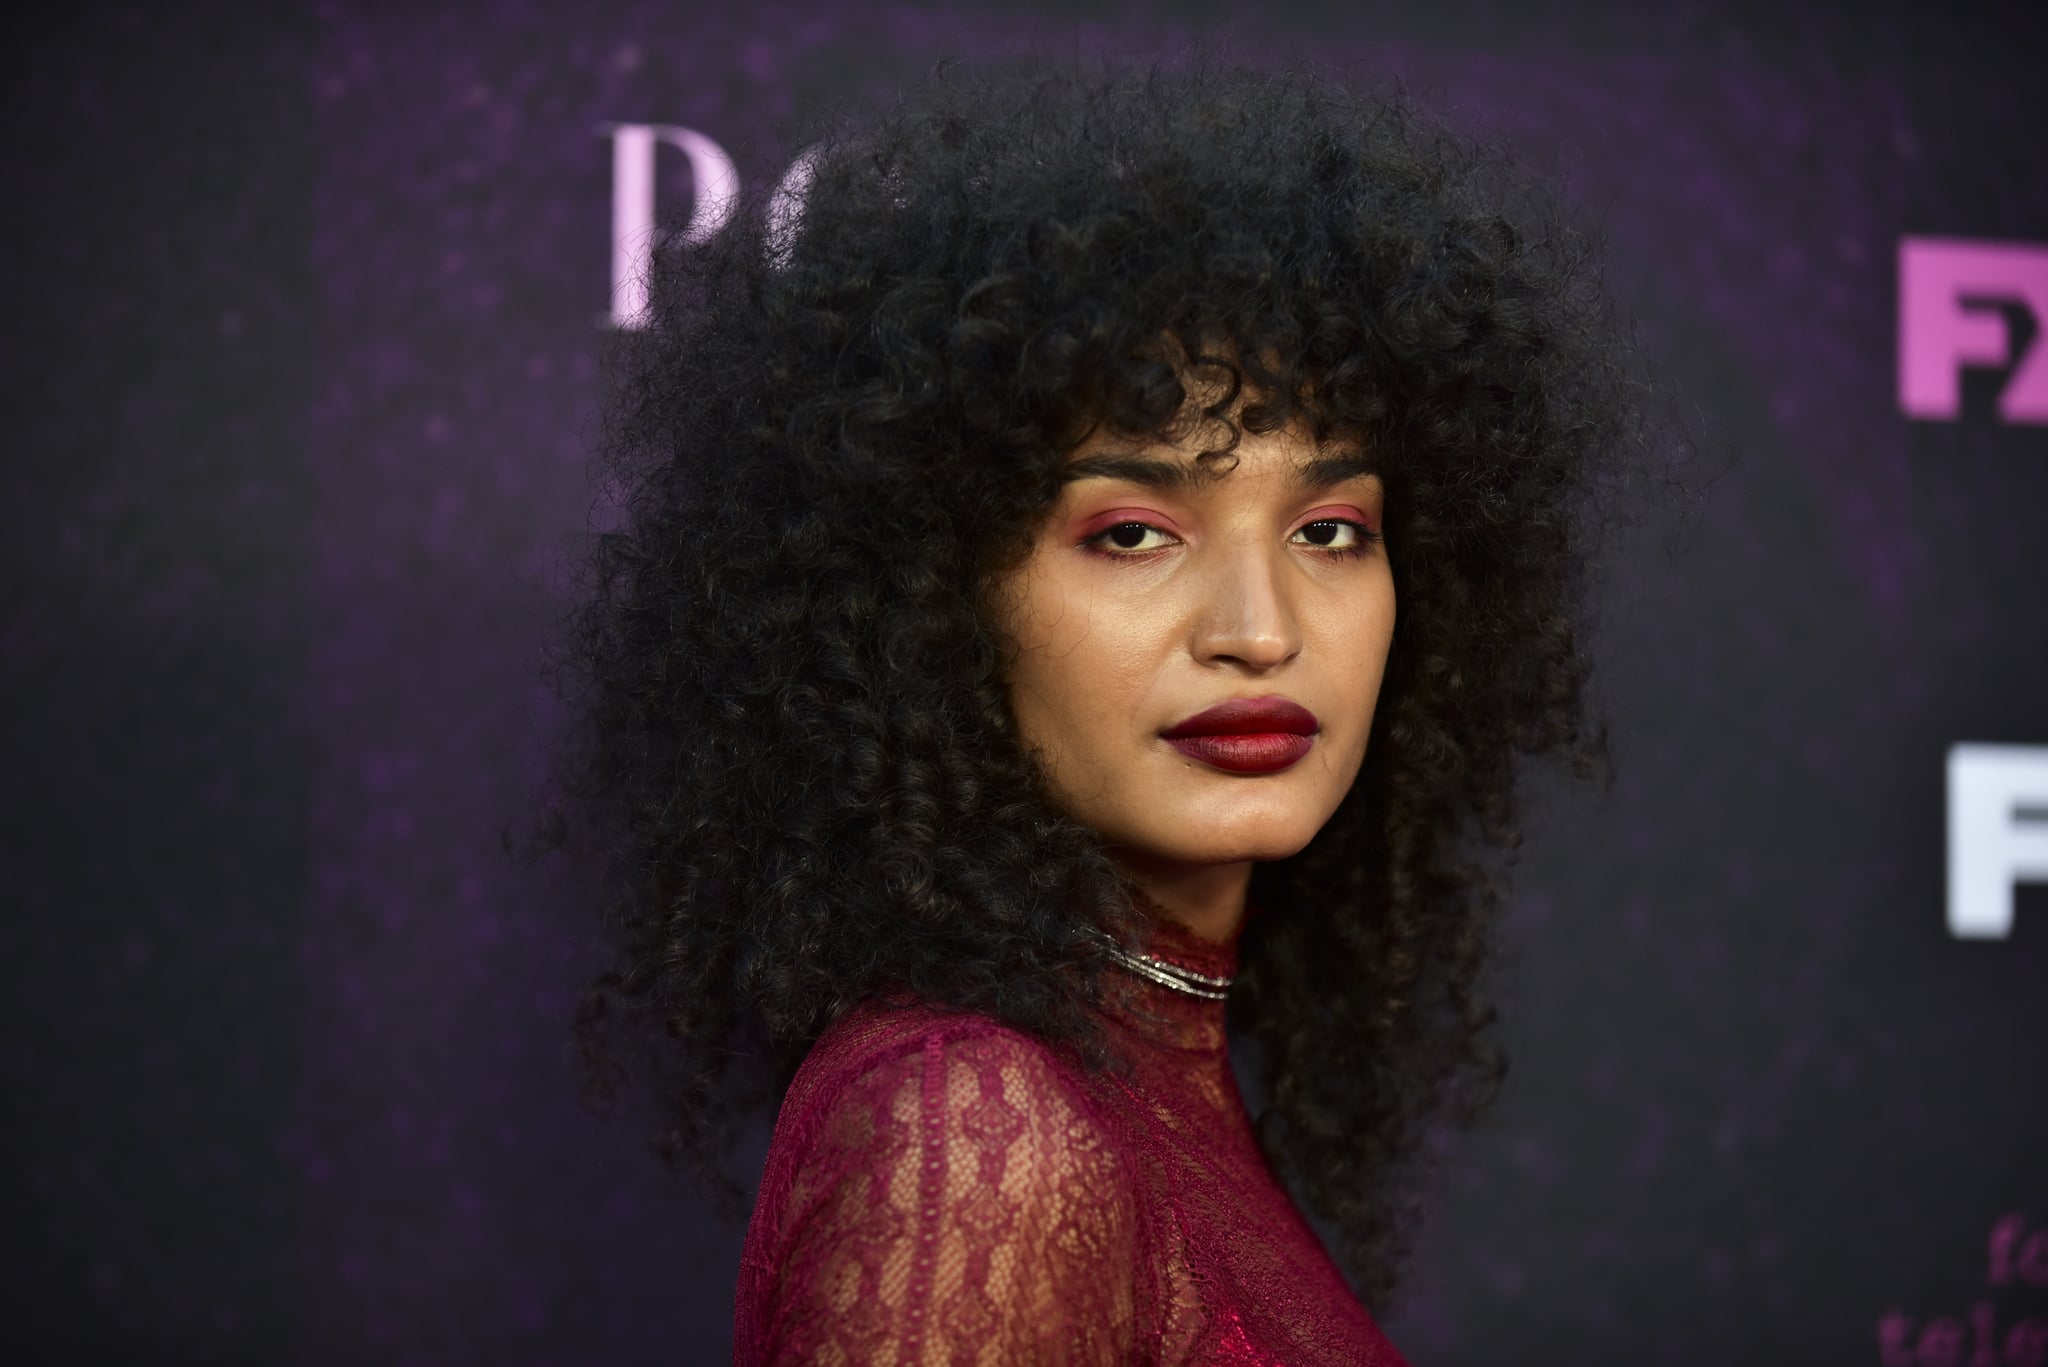 WEST HOLLYWOOD, CALIFORNIA - AUGUST 09: Indya Moore attends the red carpet event for FX's